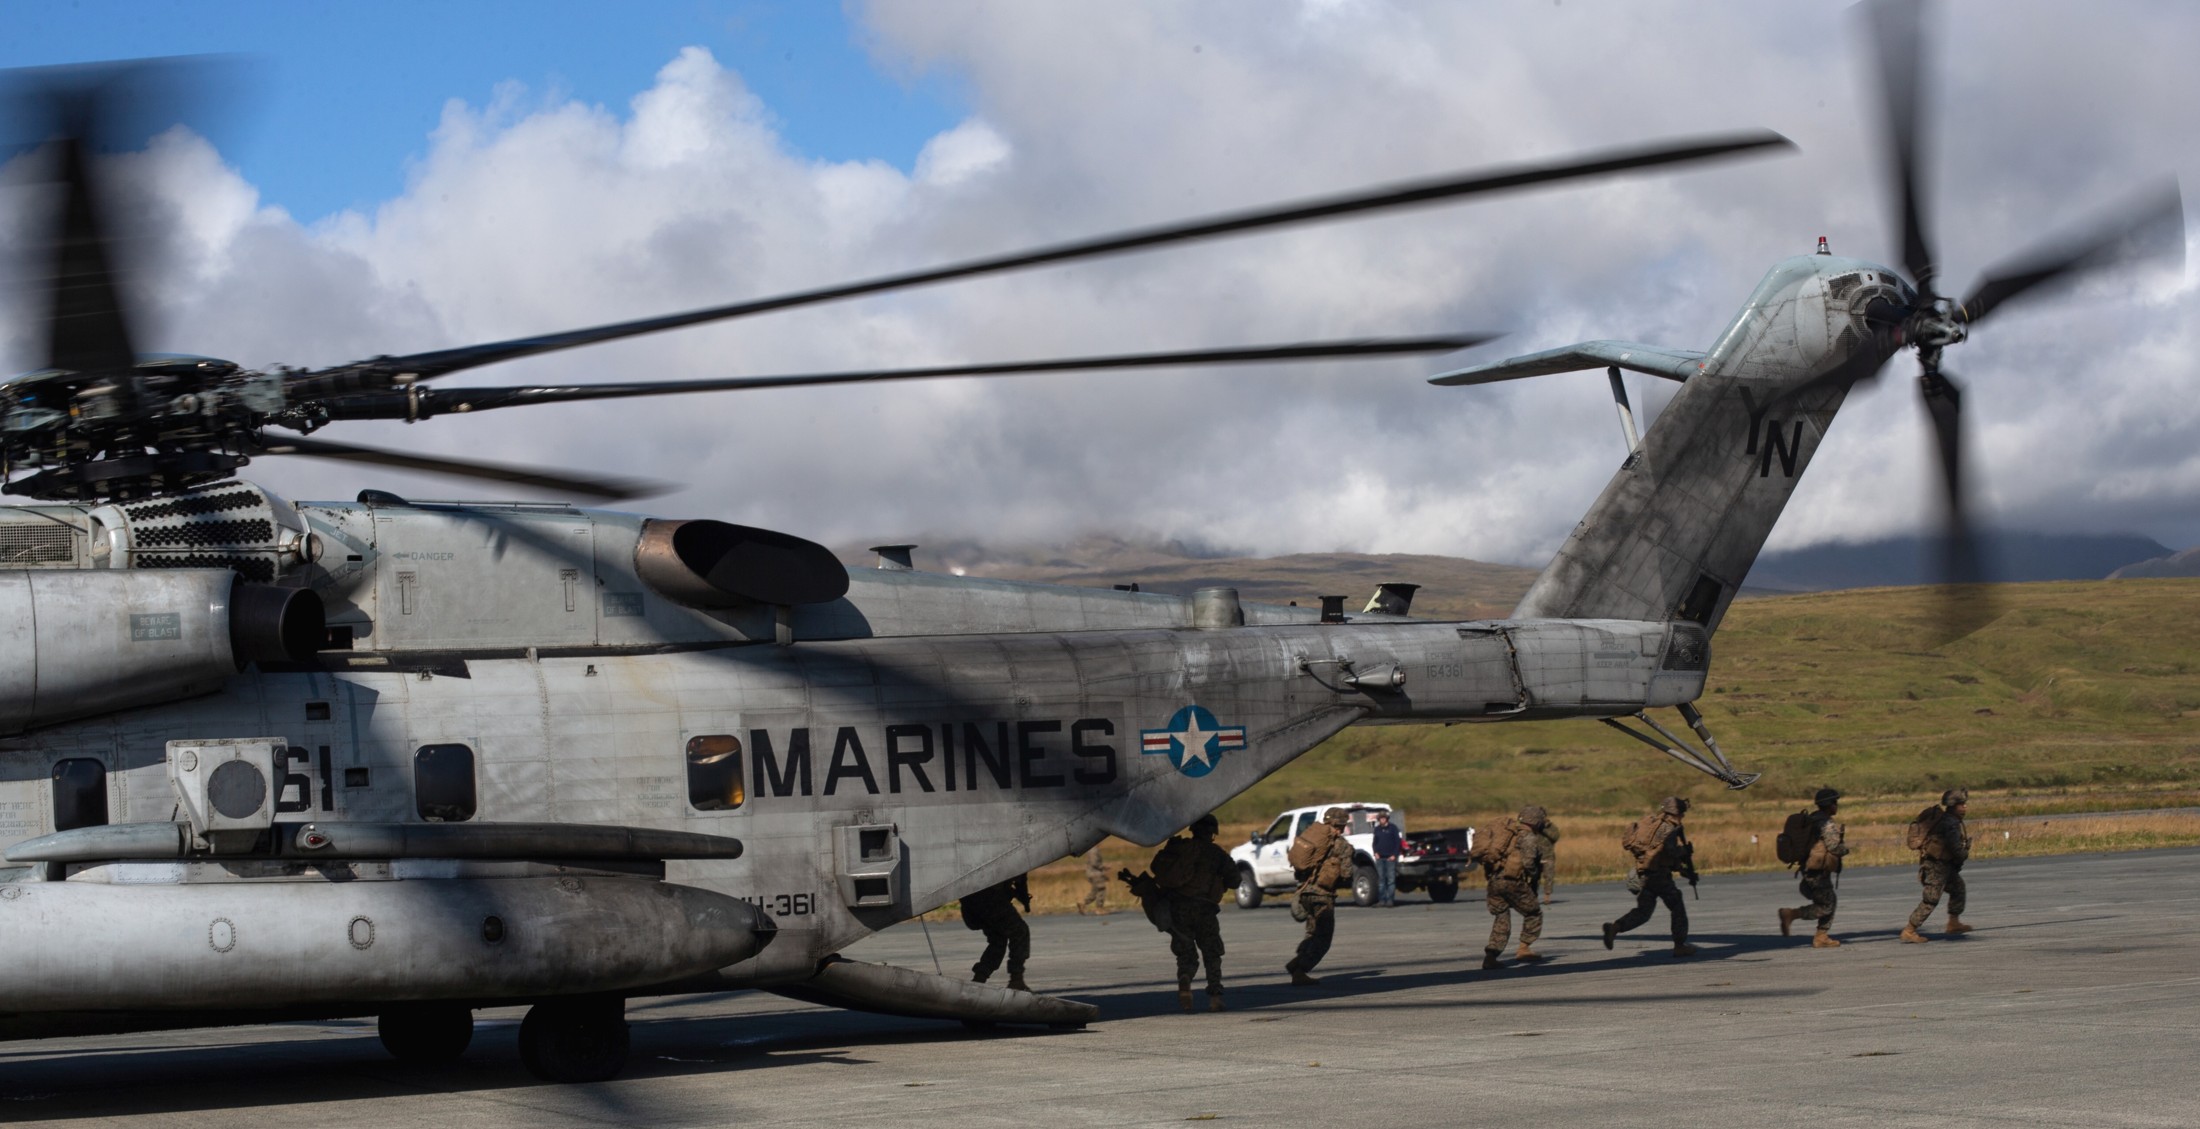 hmh-361 flying tigers marine heavy helicopter squadron usmc sikorsky ch-53e super stallion 54